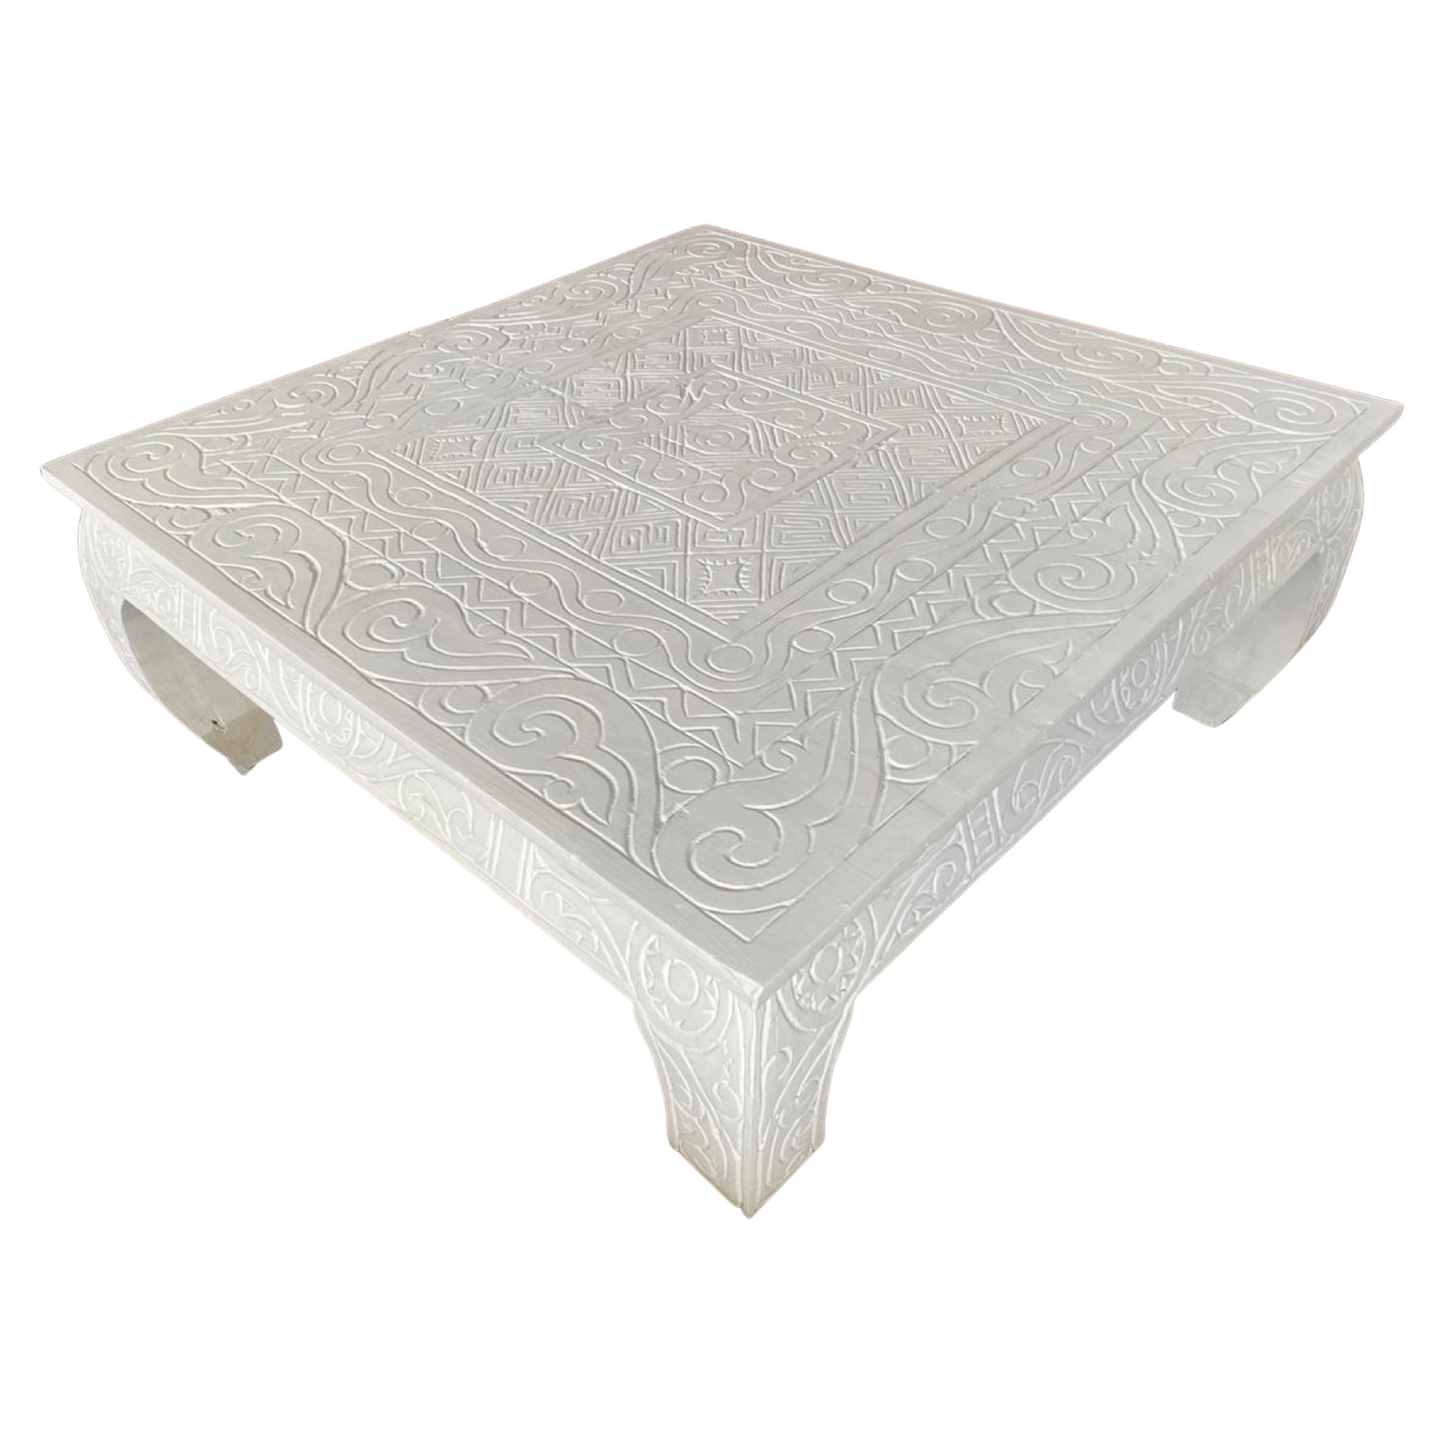 wooden carved coffee table suku white wash bali design hand carved hand made decorative house furniture wood material decorative wall panels decorative wood panels decorative panel board